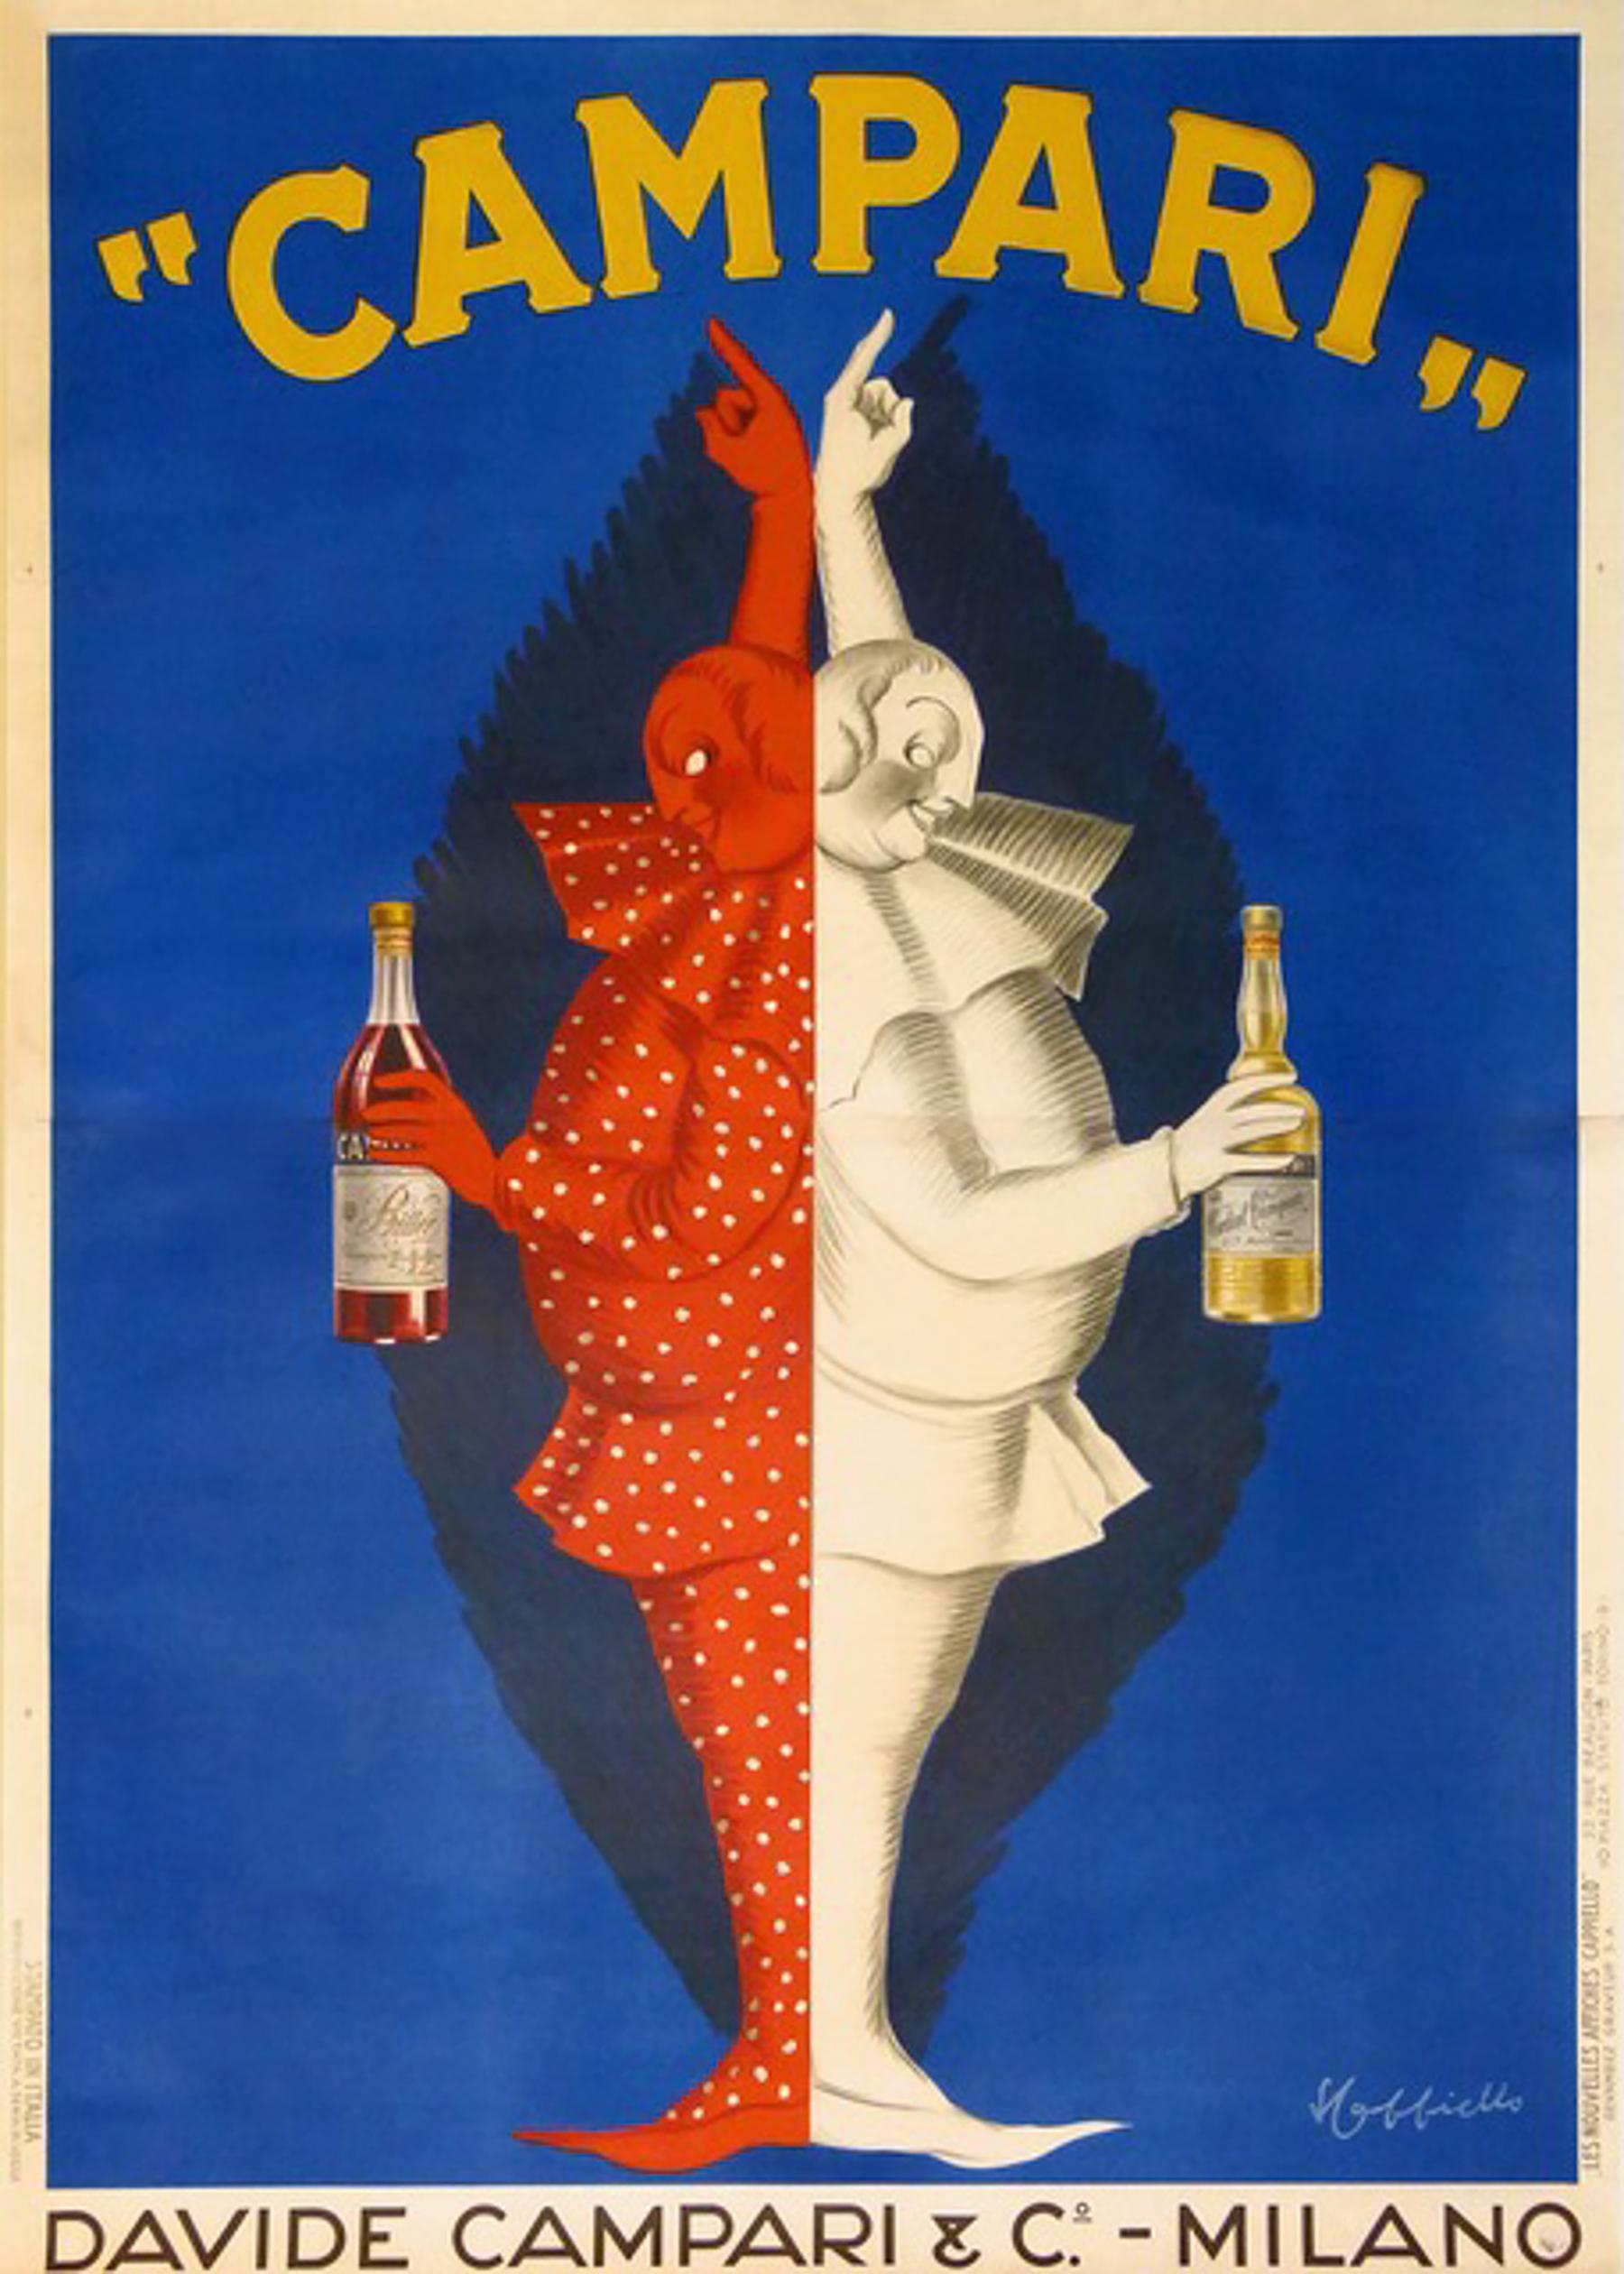 Talk about effective advertising! Campari used to be produced in two formats - the 'bitter' red color that we are used to today, to be had as an aperitif and a light colored version that was sweet and meant as a digestif, dessert-style drink. This